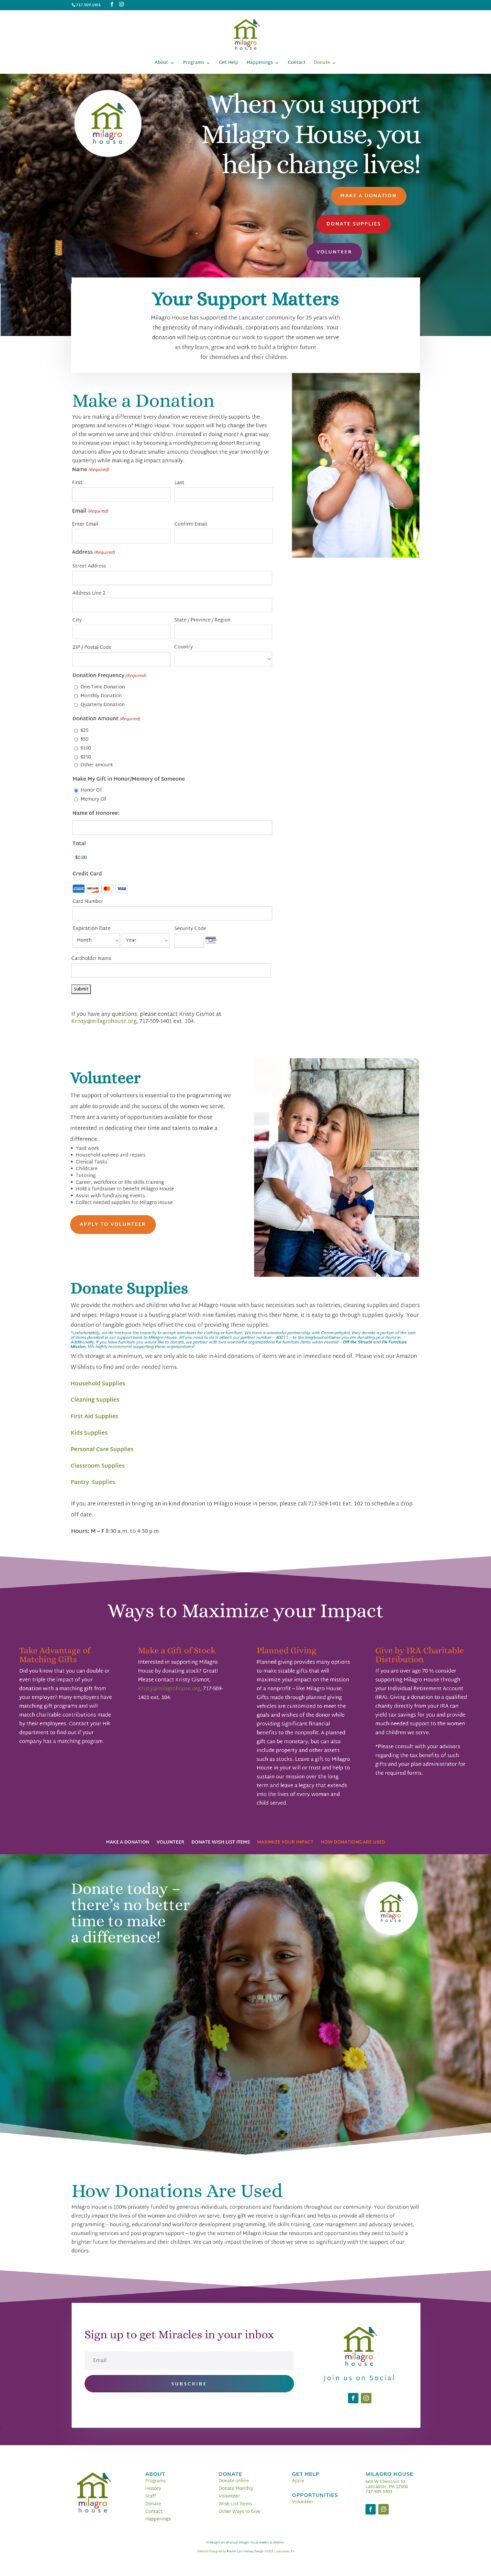  Milagro House Lancaster, PA Nonprofit Website Redesigned by Lancaster, PA Graphic Designer & Web Designer Rachel Lynn Heisey Website Redesign